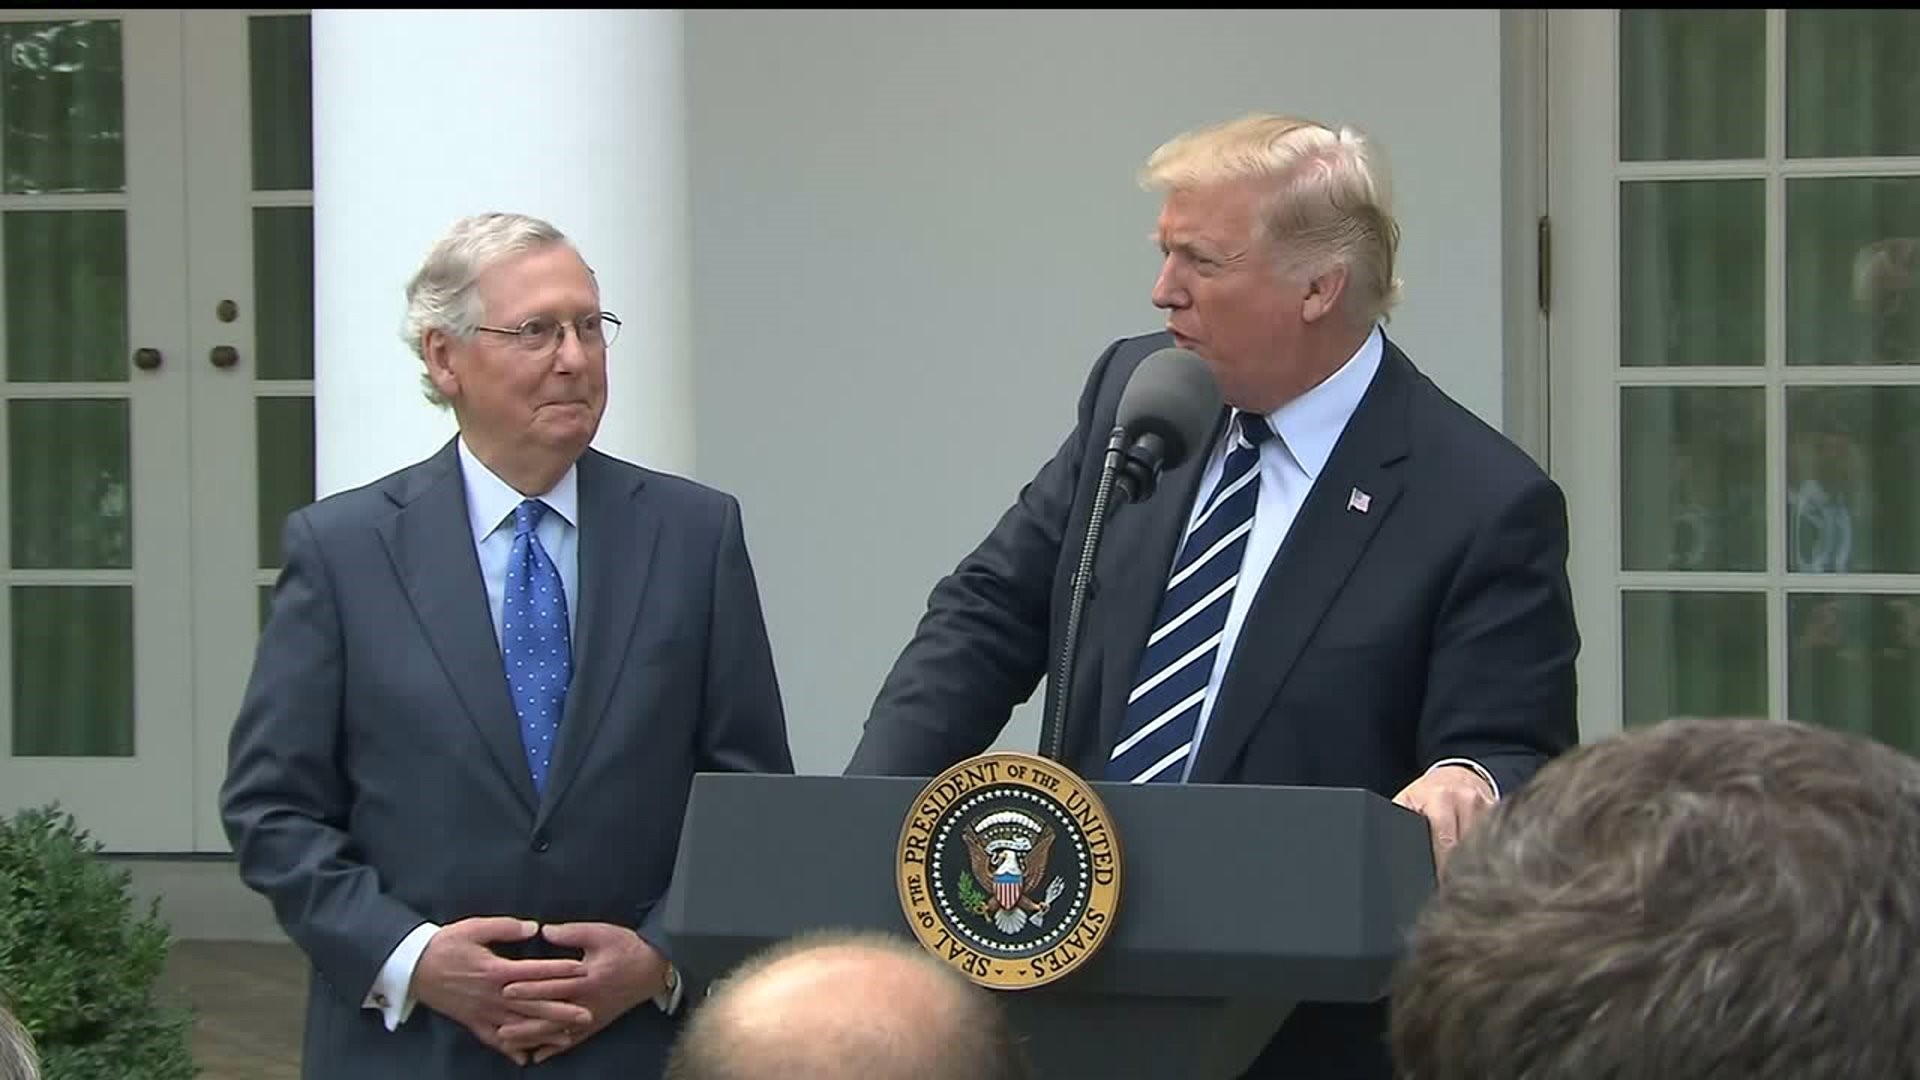 President Trump and McConnell show unity